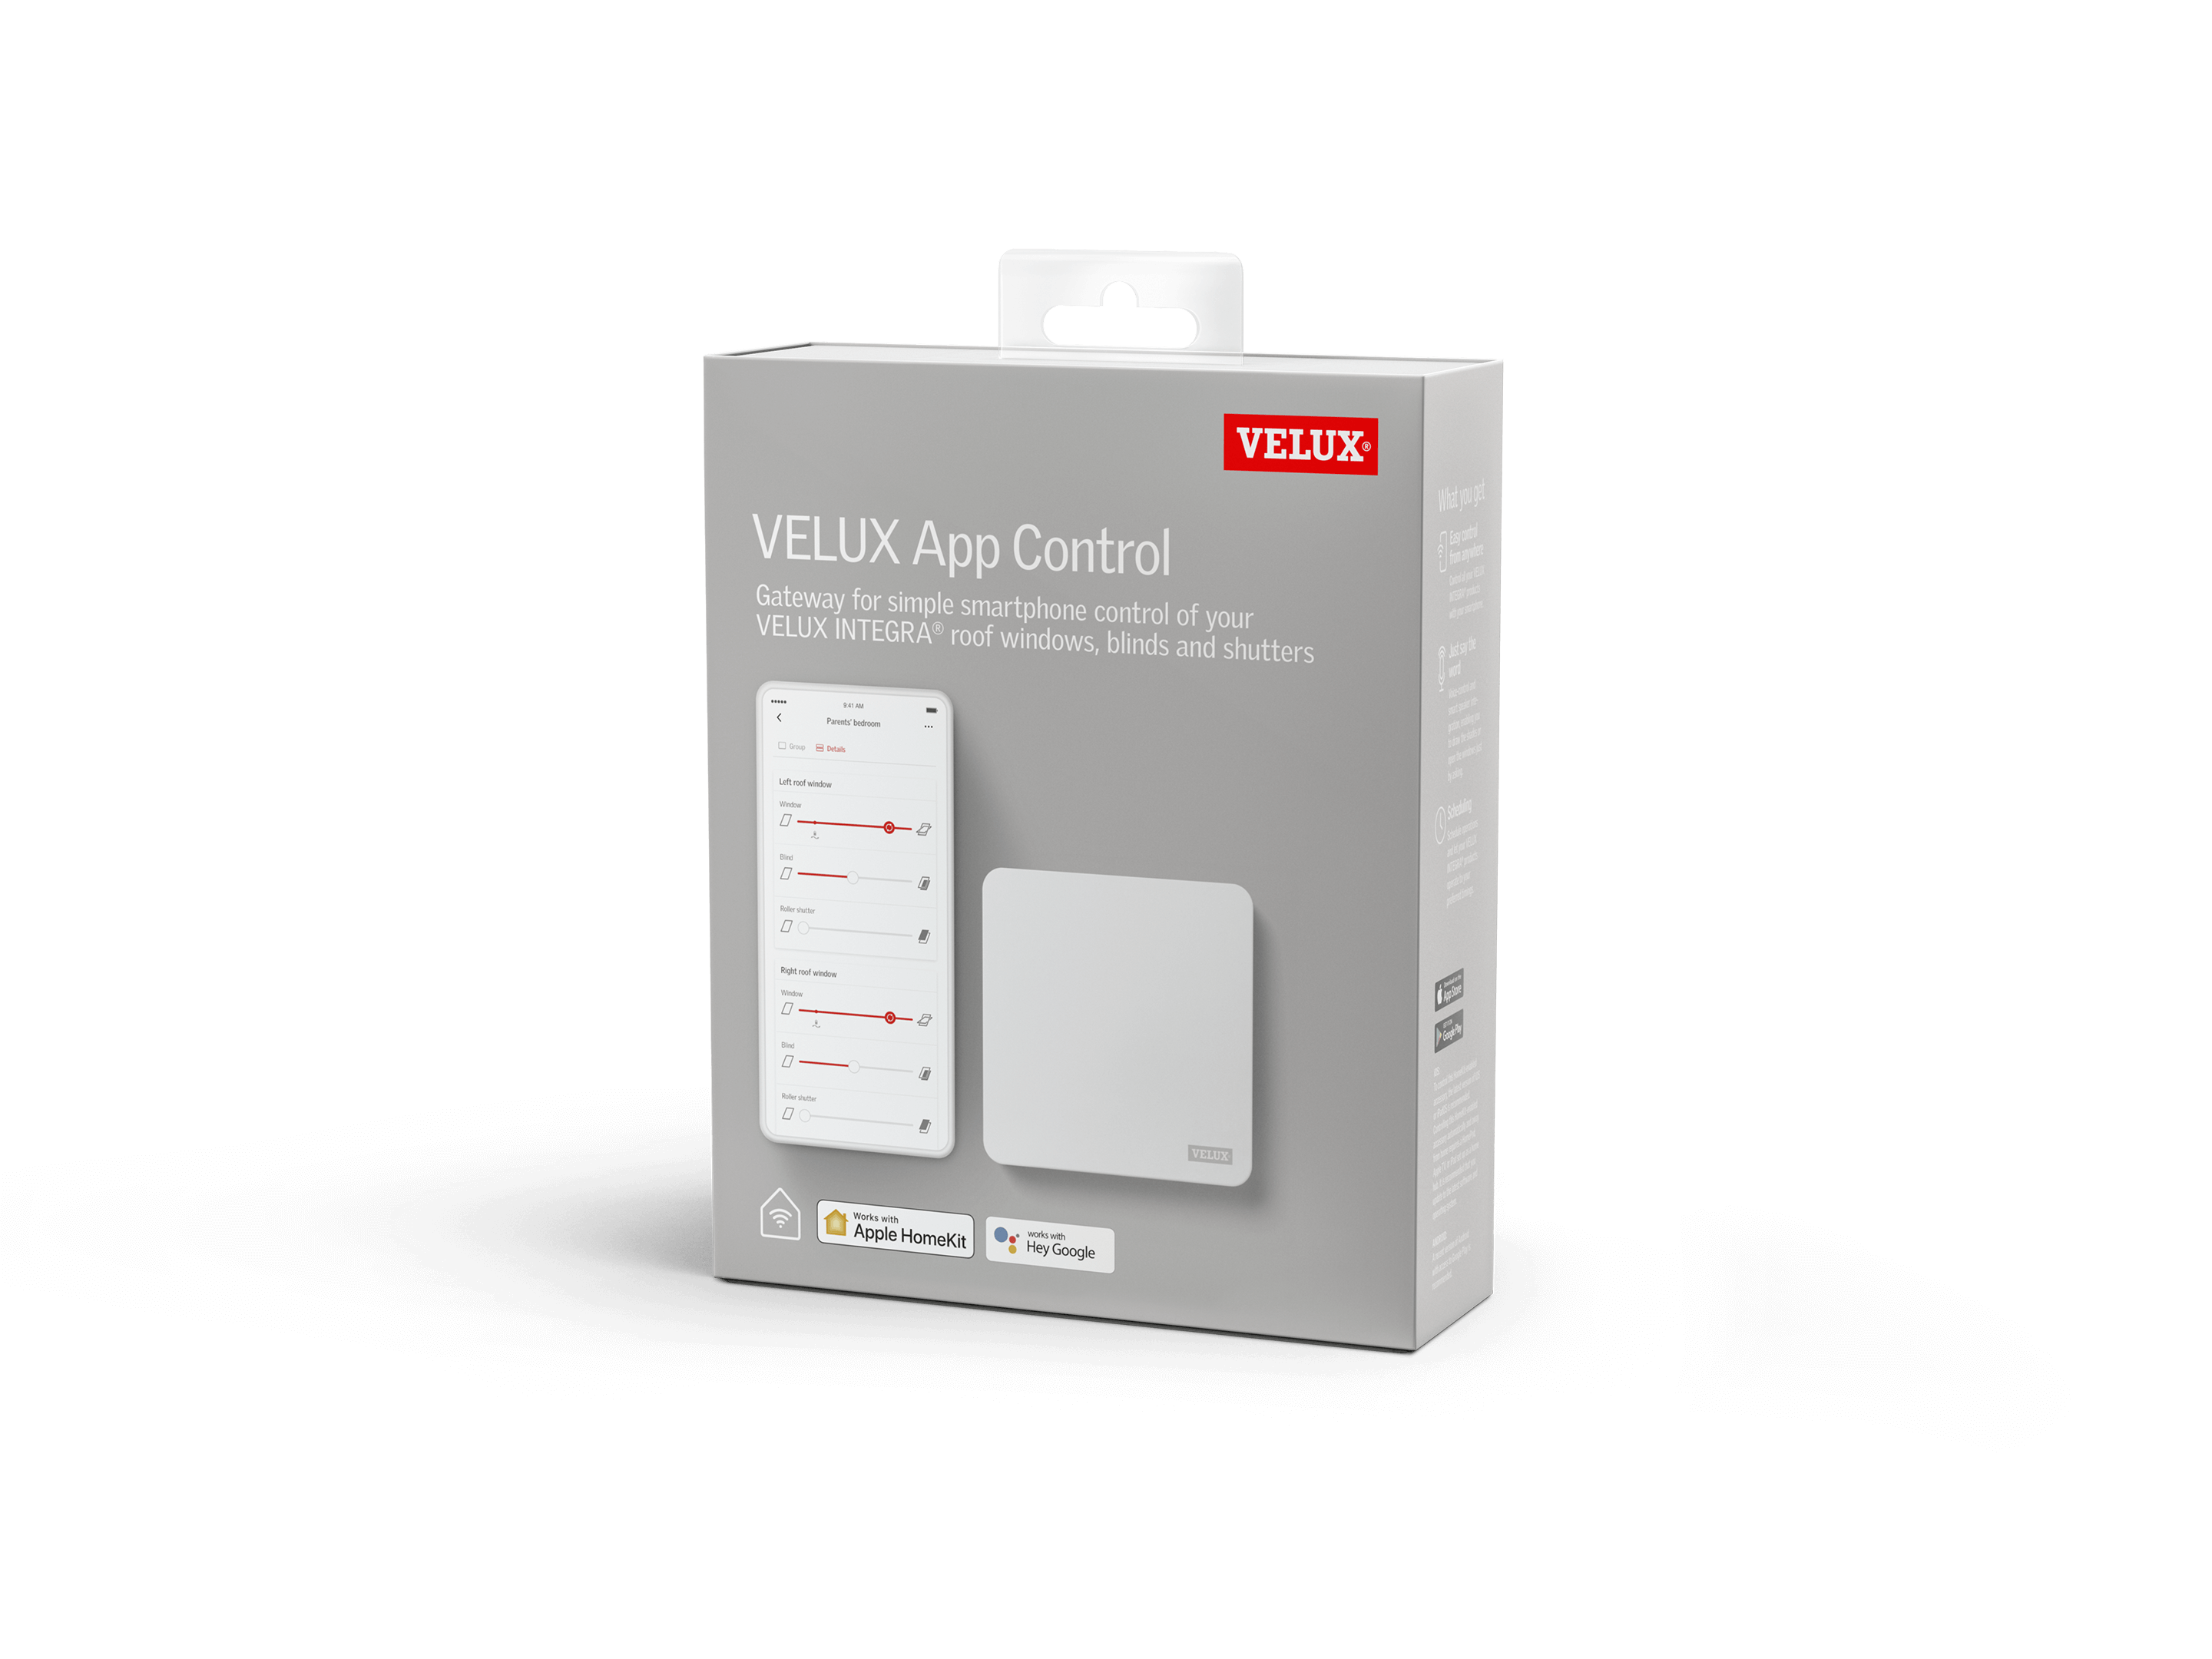 Image of packaging for VELUX App control add-on accessory